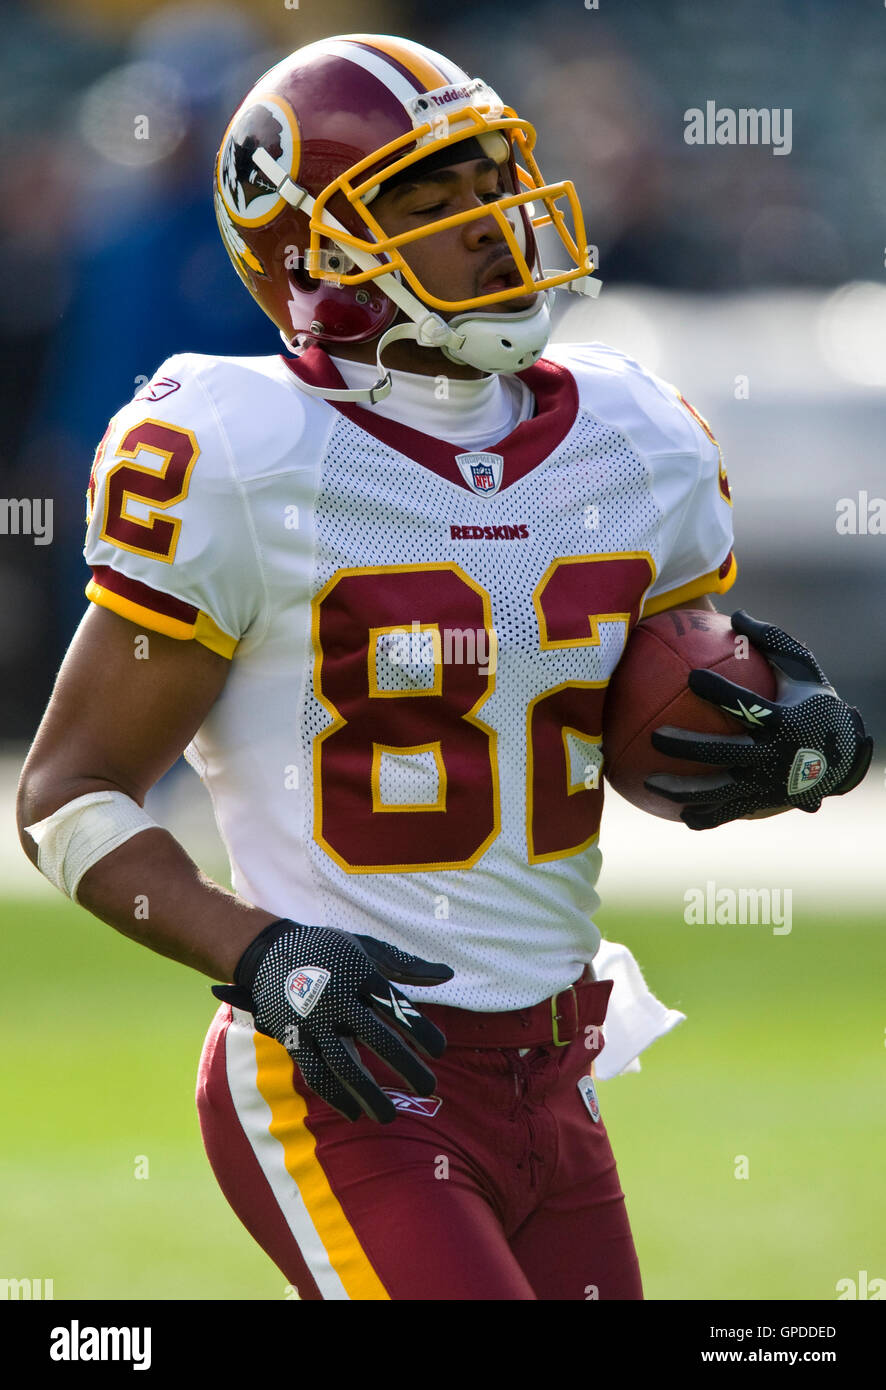 December 13, 2009; Oakland, CA, USA;  Washington Redskins wide receiver Antwaan Randle El (82) before the game against the Oakland Raiders at Oakland-Alameda County Coliseum.  Washington defeated Oakland 34-13. Stock Photo